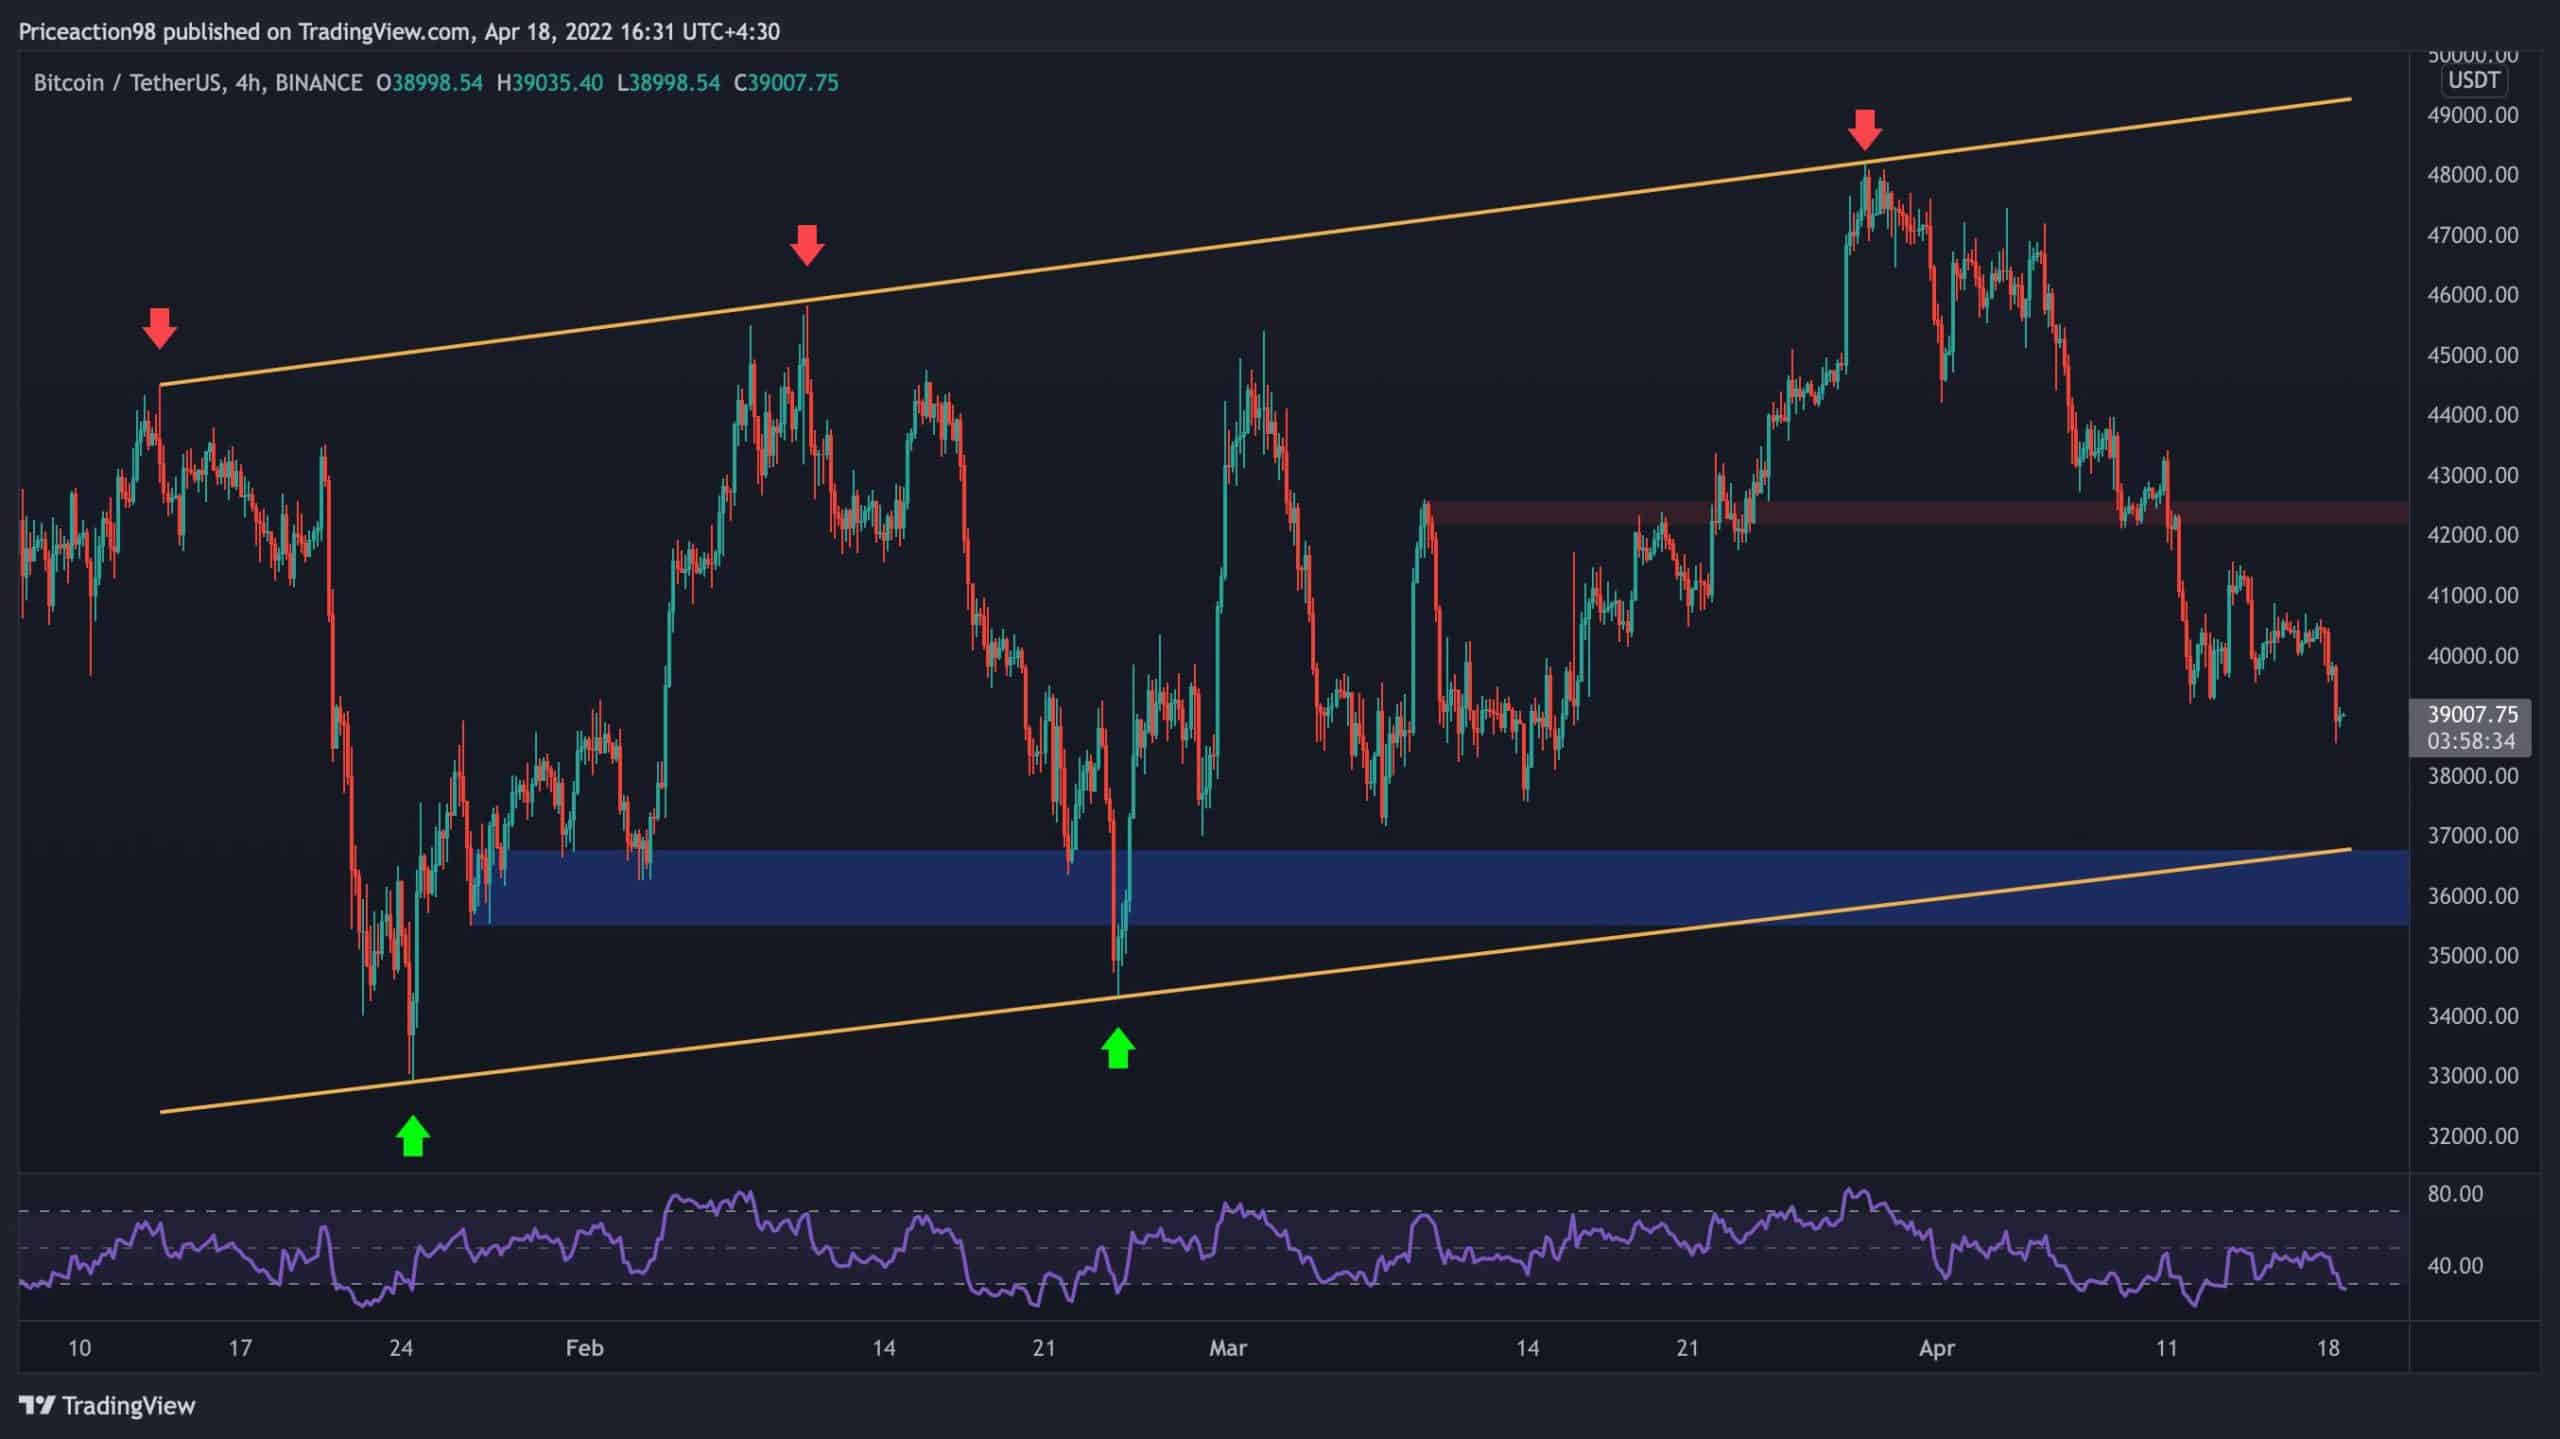 These-are-the-key-levels-to-watch-as-btc-broke-below-$40k-(bitcoin-price-analysis)